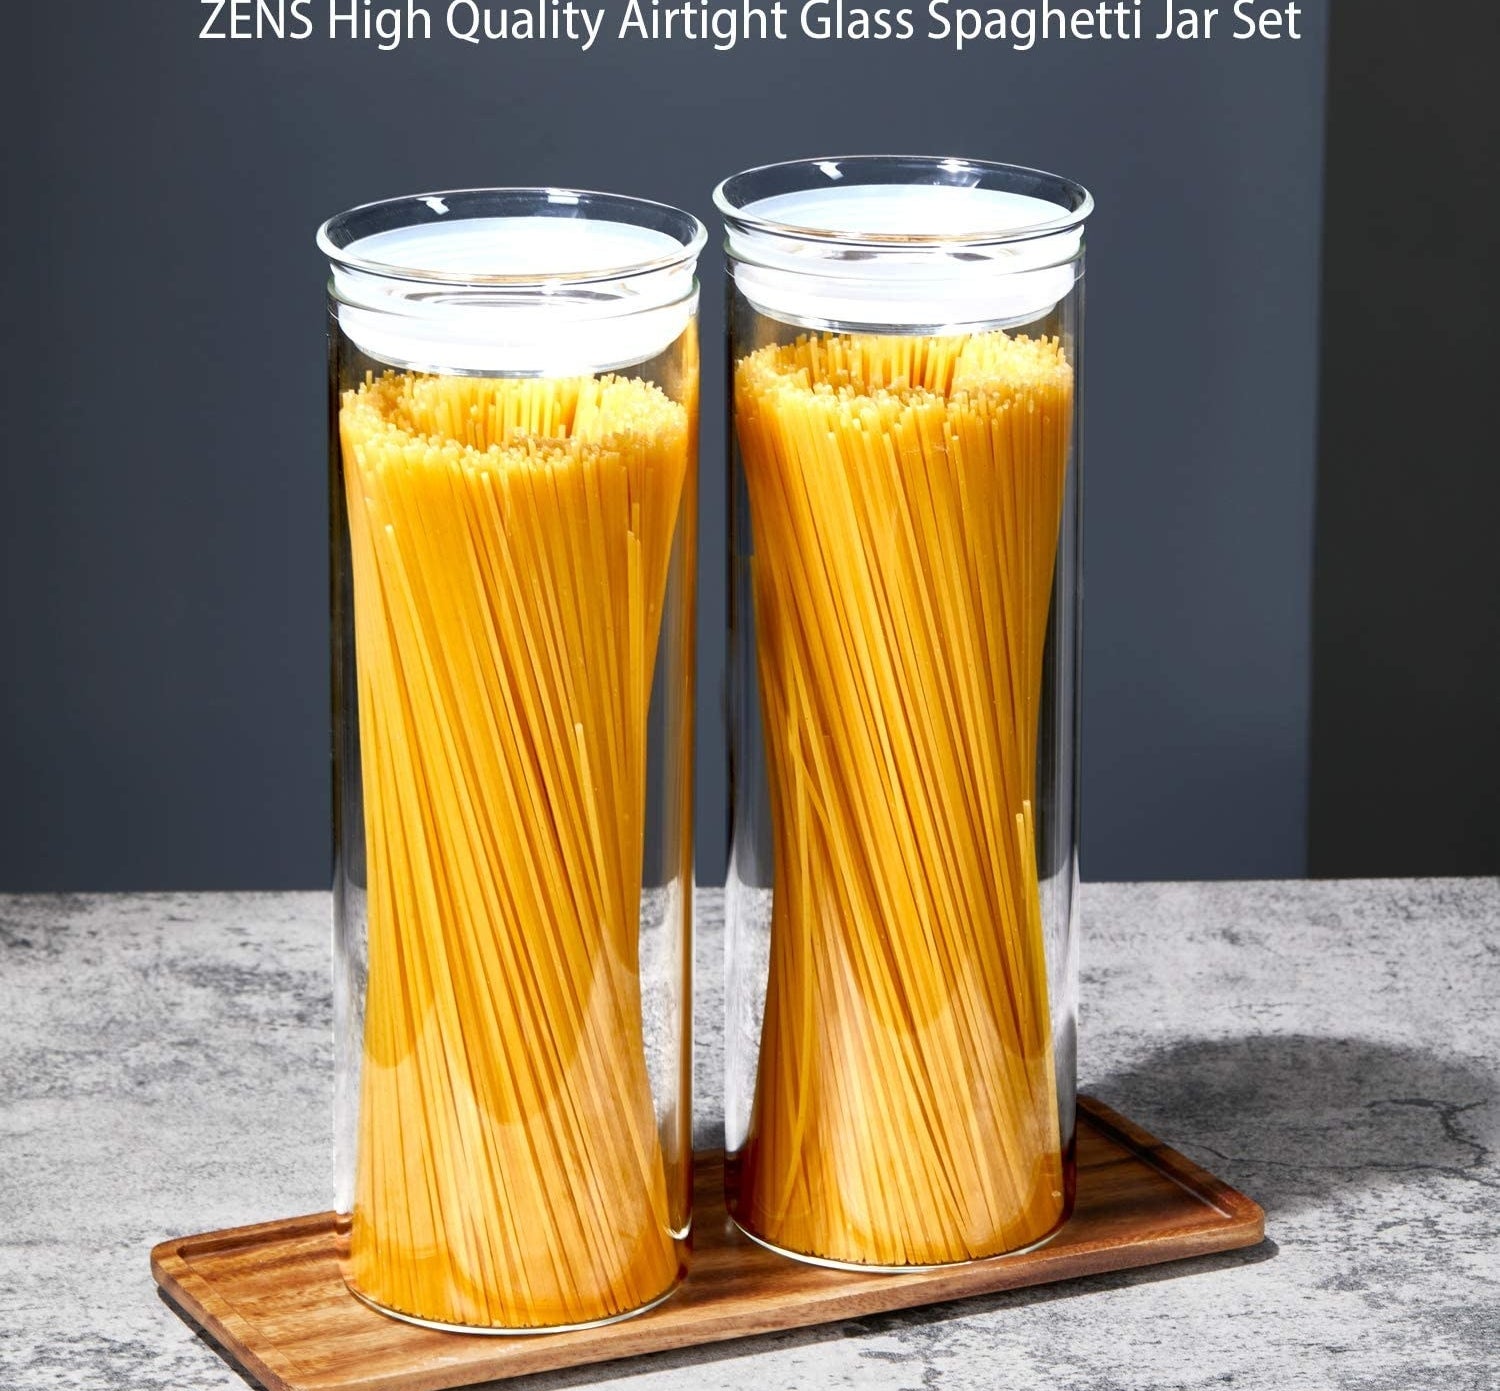 A pair of tall skinny glass canisters filled with spaghetti noodles